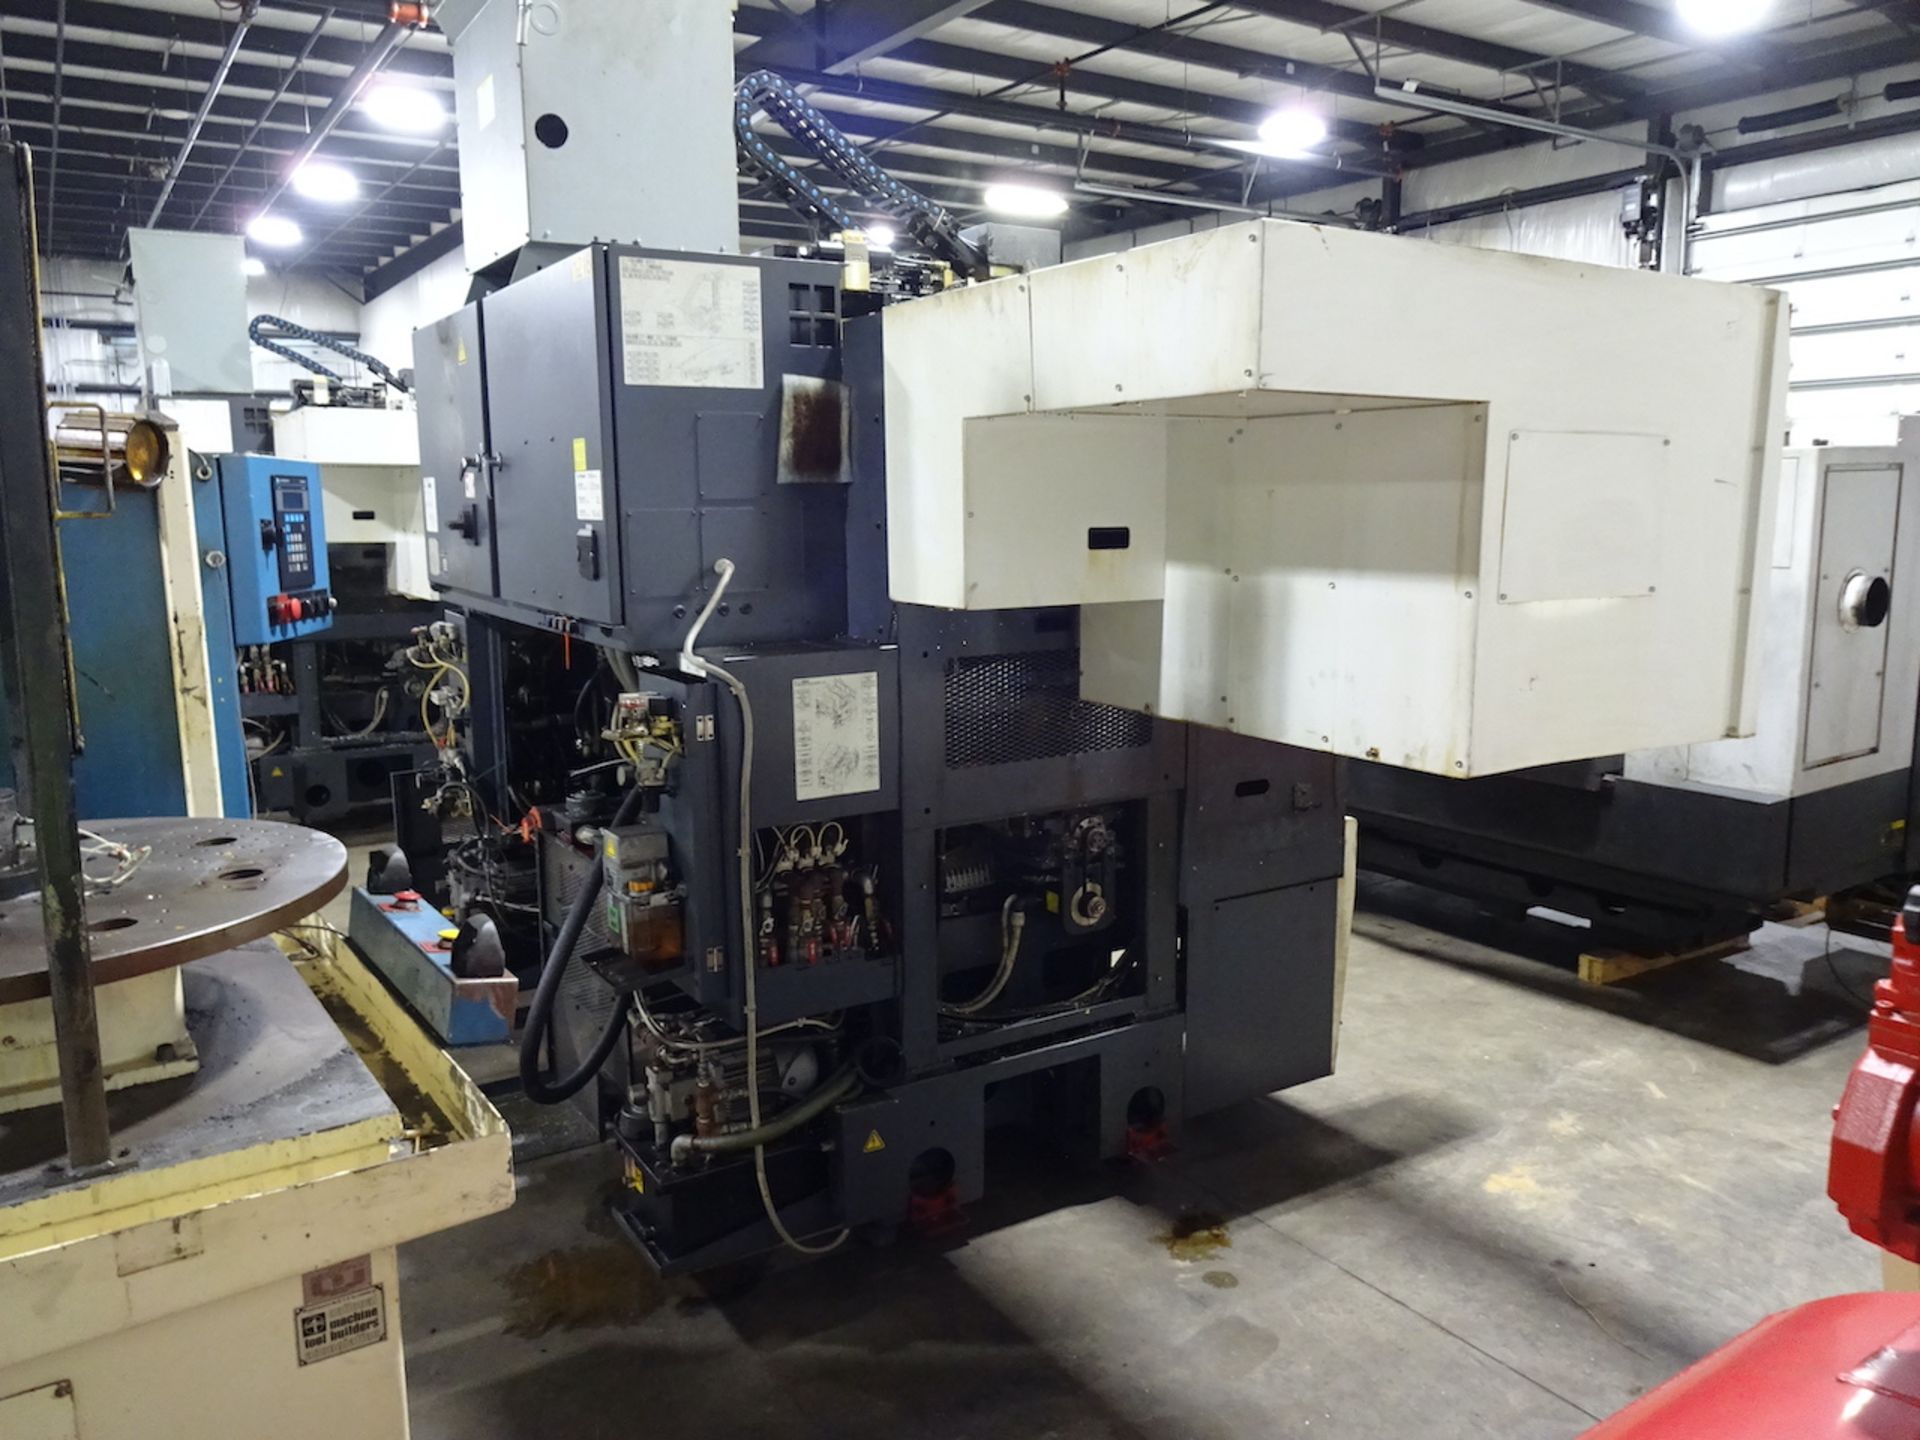 FUJI CSD-300 TWIN SPINDLE CNC LATHE (2014) S/N SE0102377, GANTRY LOAD AND STOCKER TABLE, RECOMMENDED - Image 16 of 25